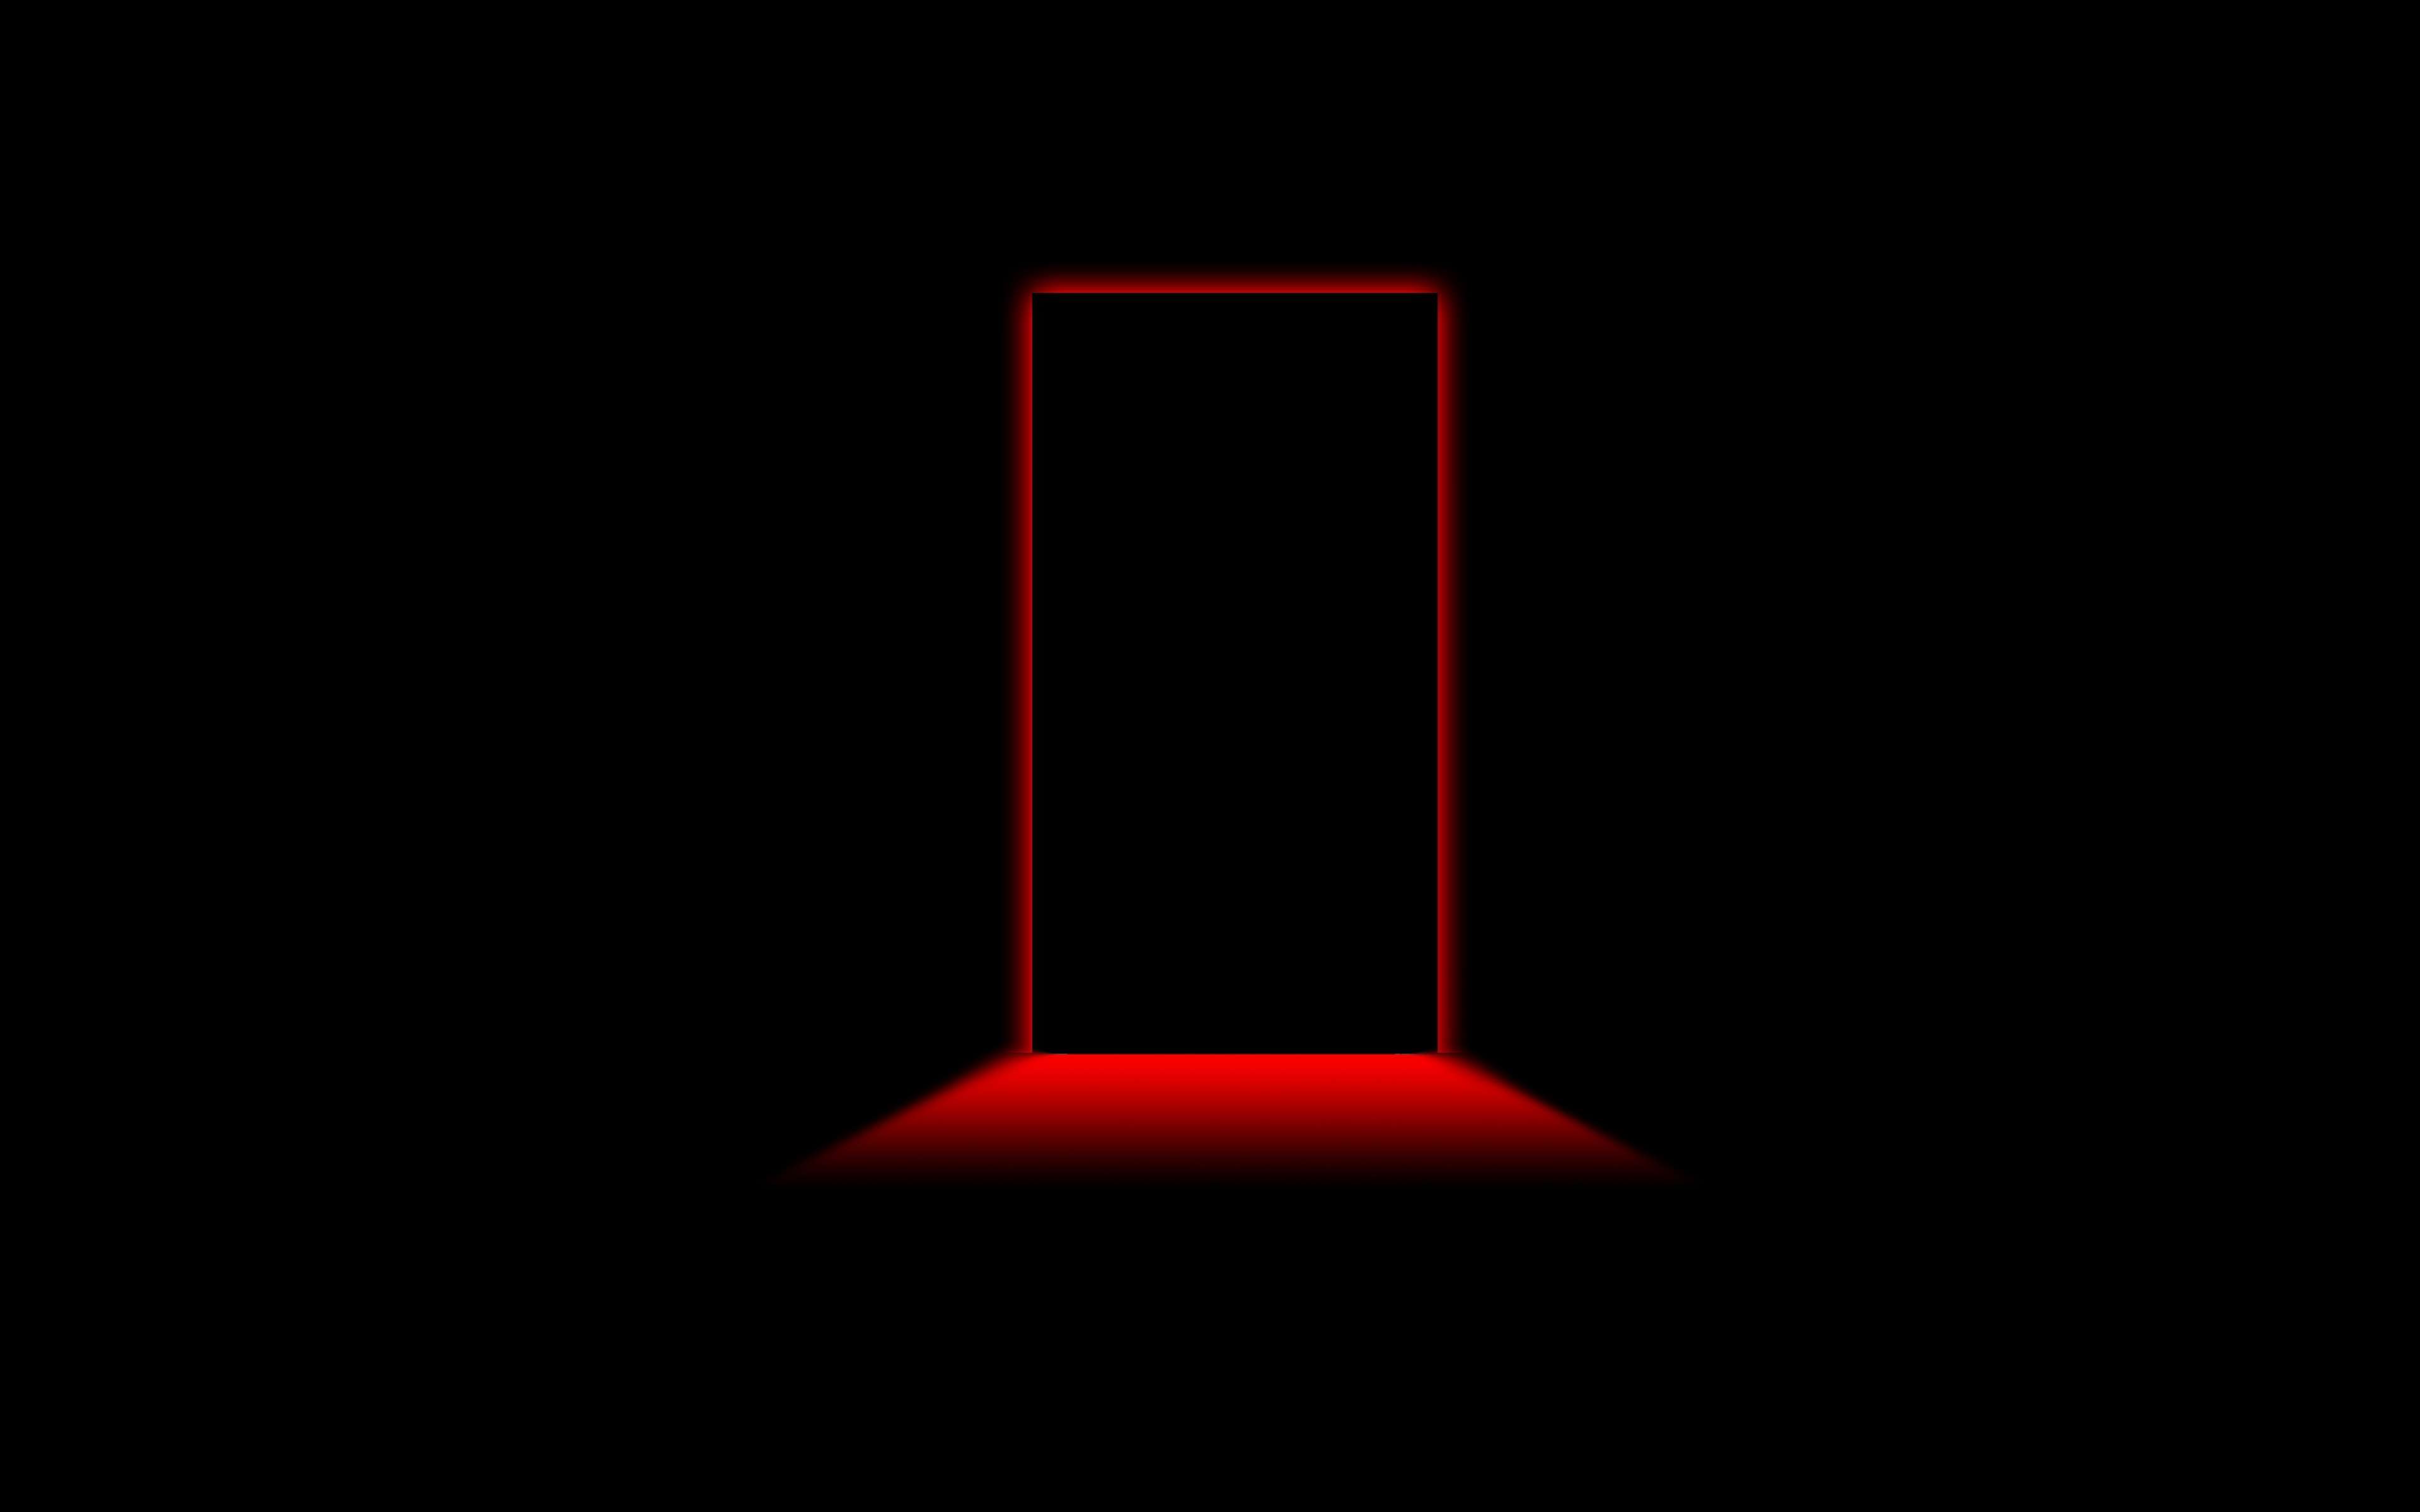 Black and Red Line Wallpapers - Top Free Black and Red Line Backgrounds ...